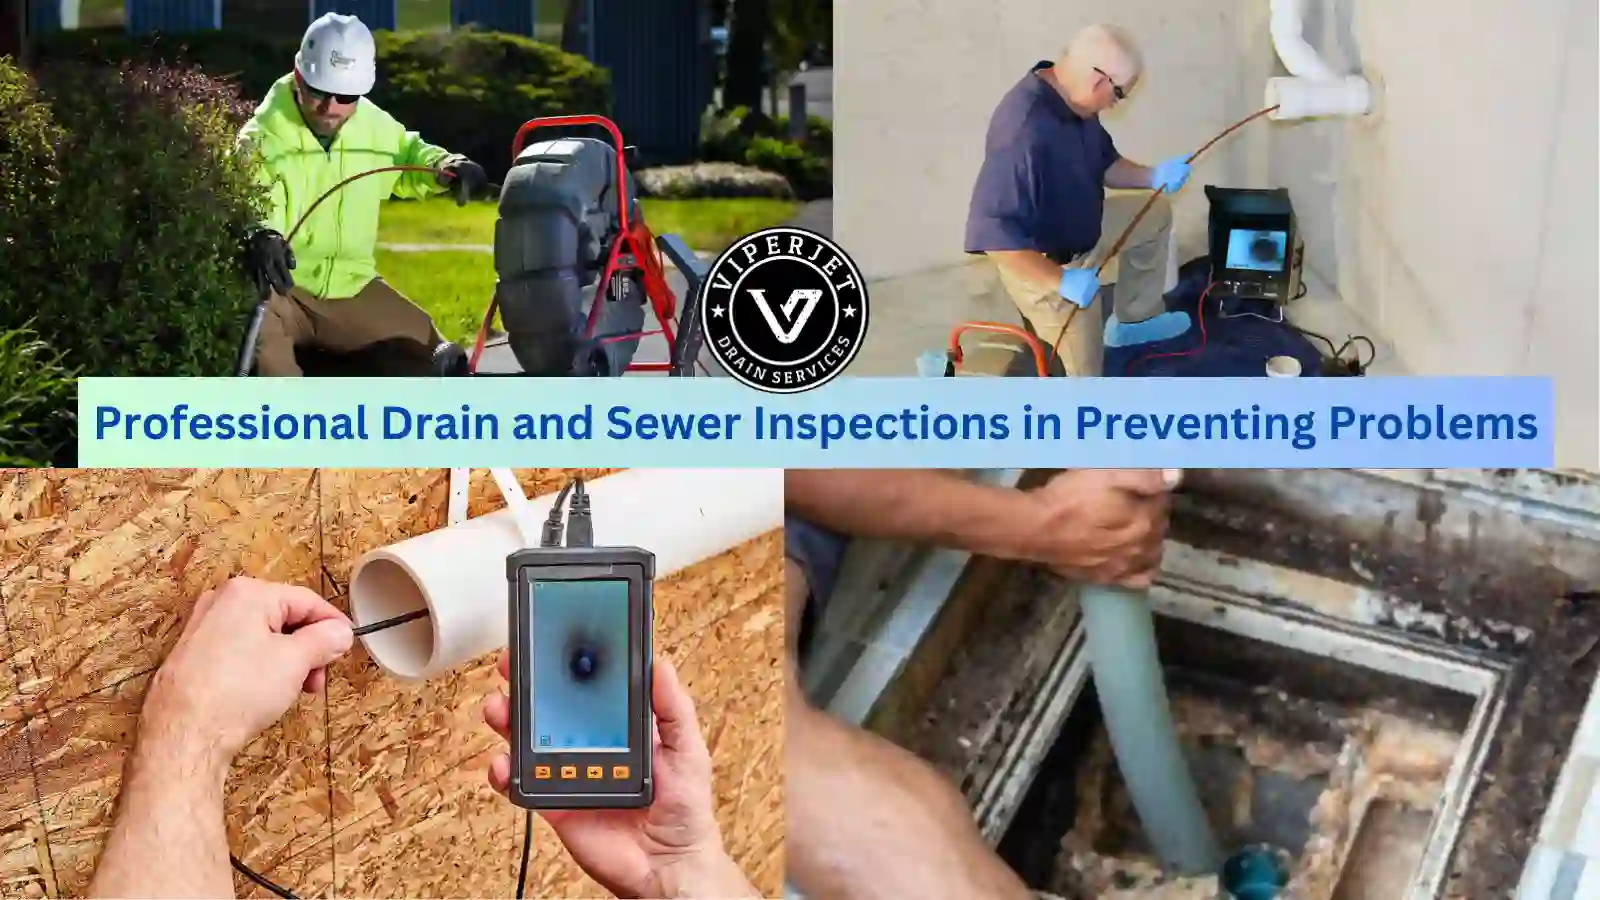 Professional Drain and Sewer Inspections